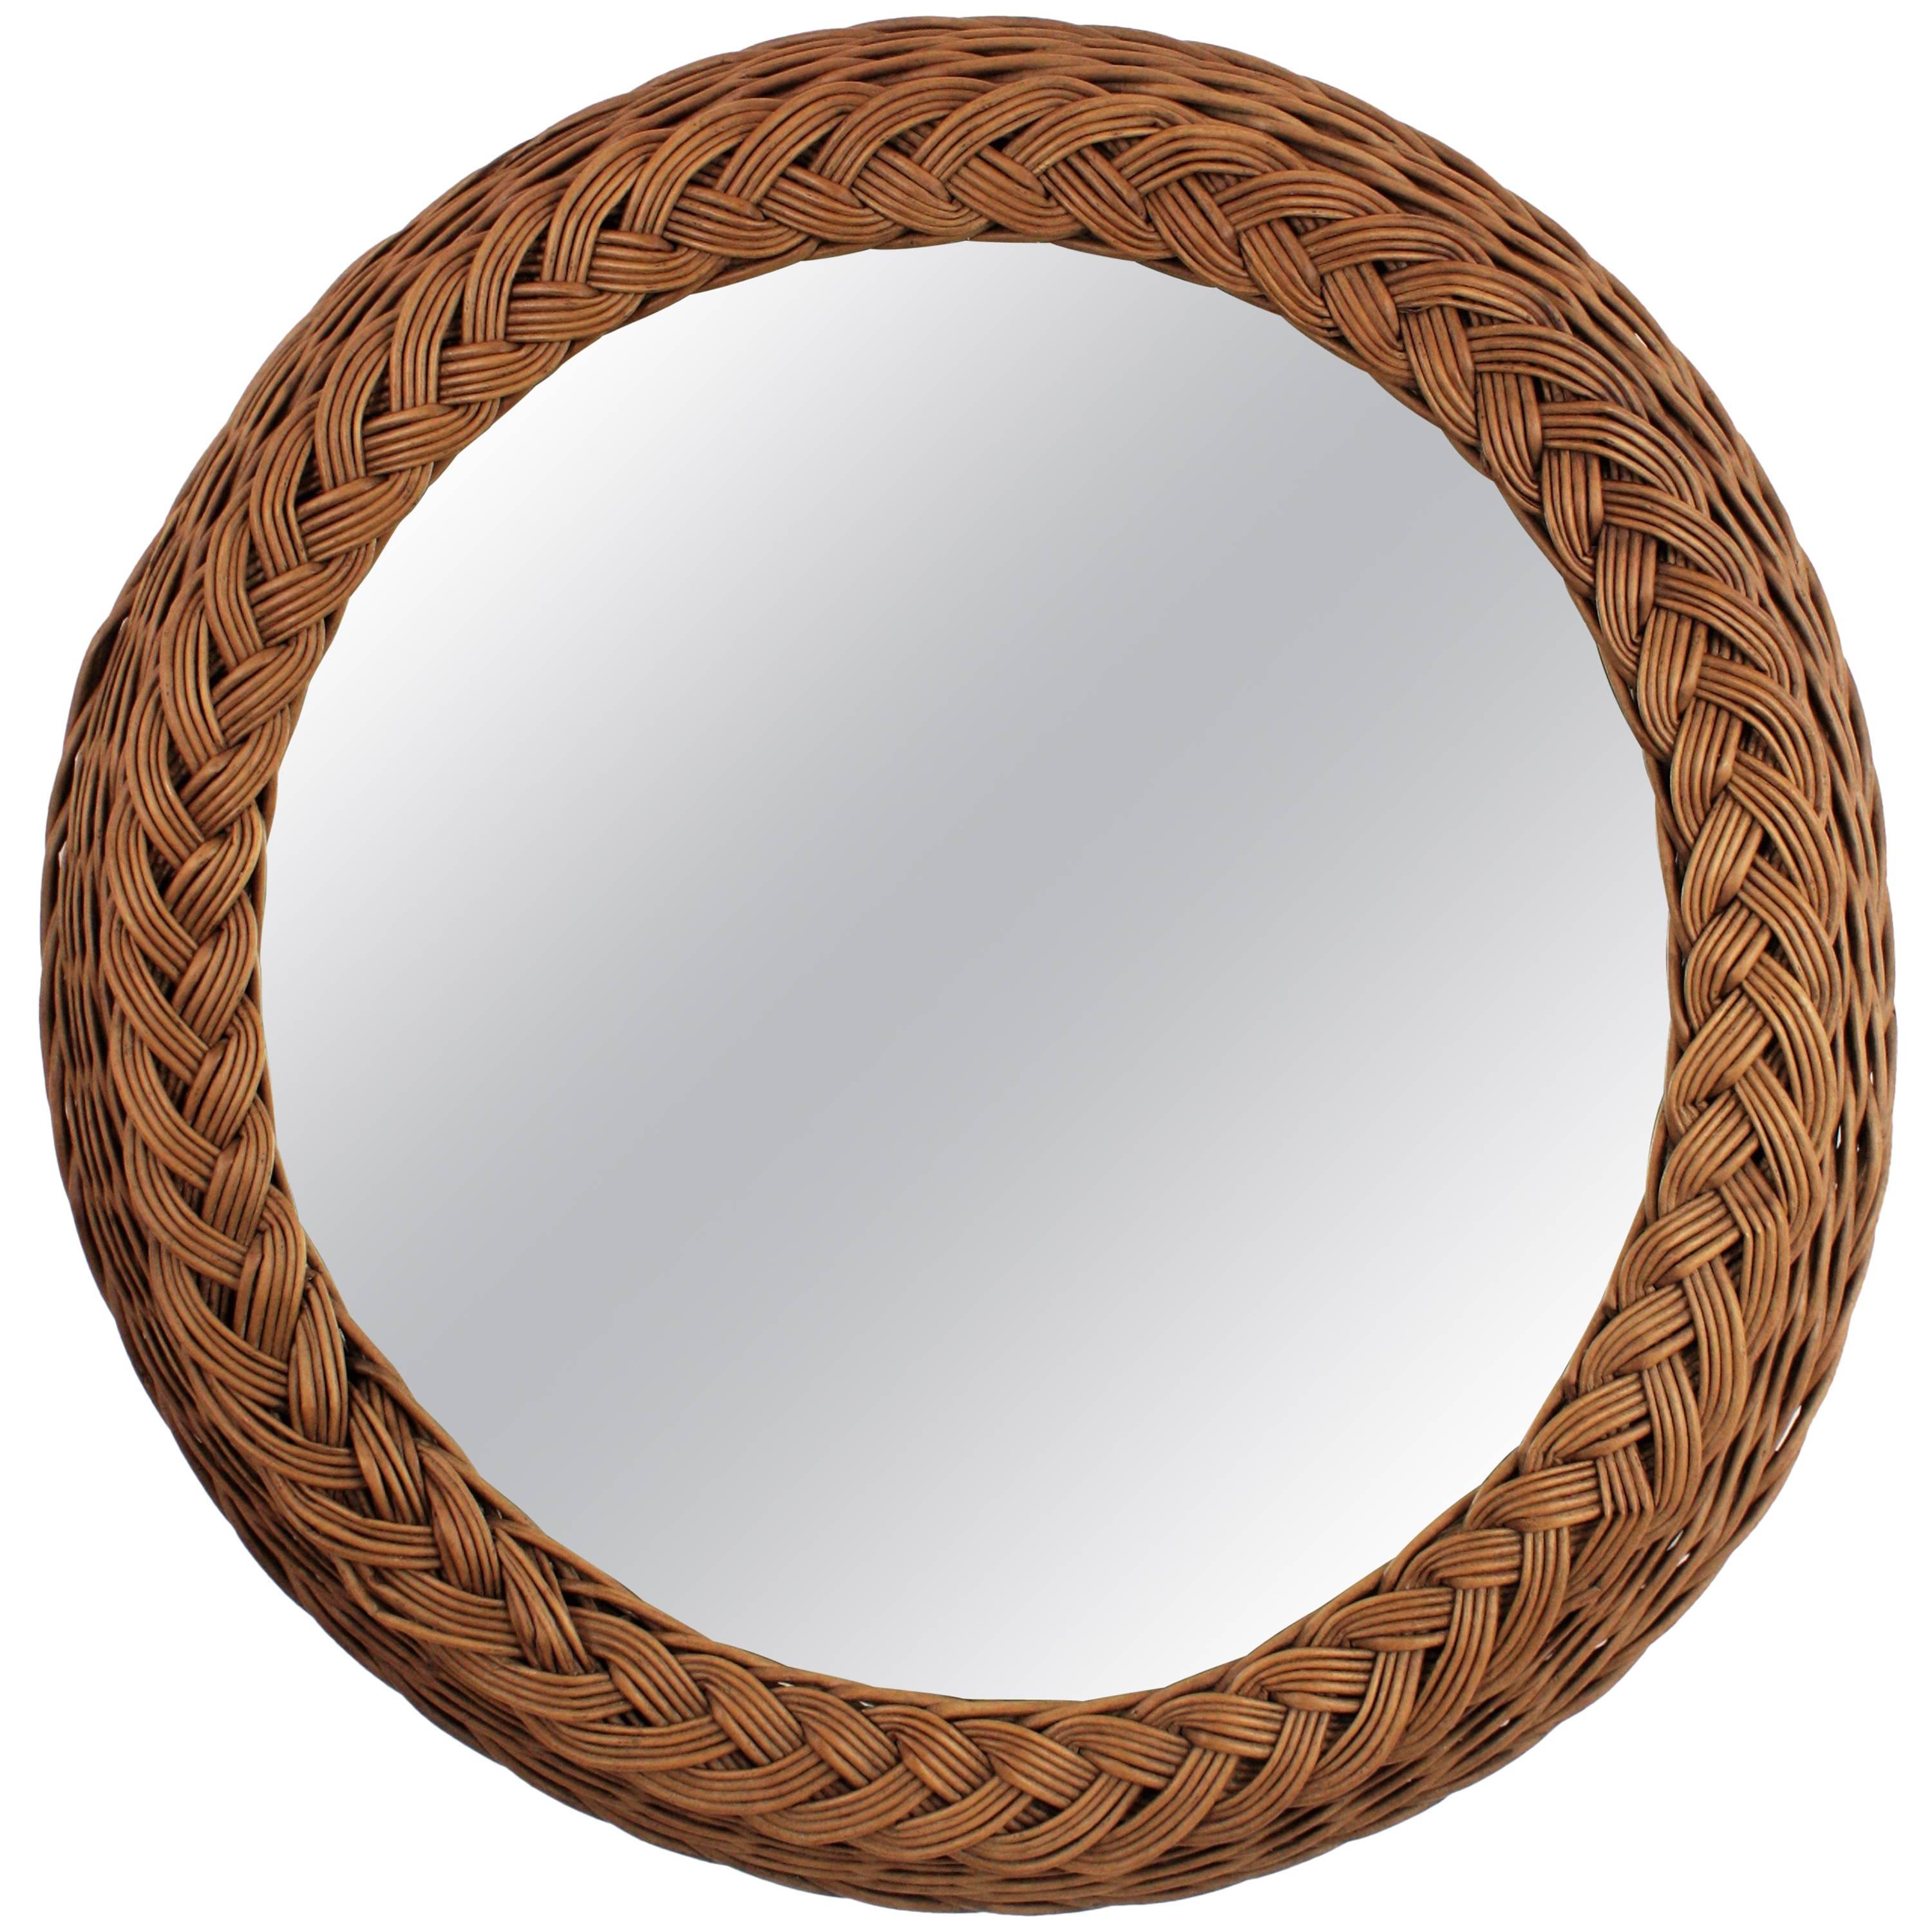 Large Woven Wicker Round Braided Mirror, Spain, 1940s